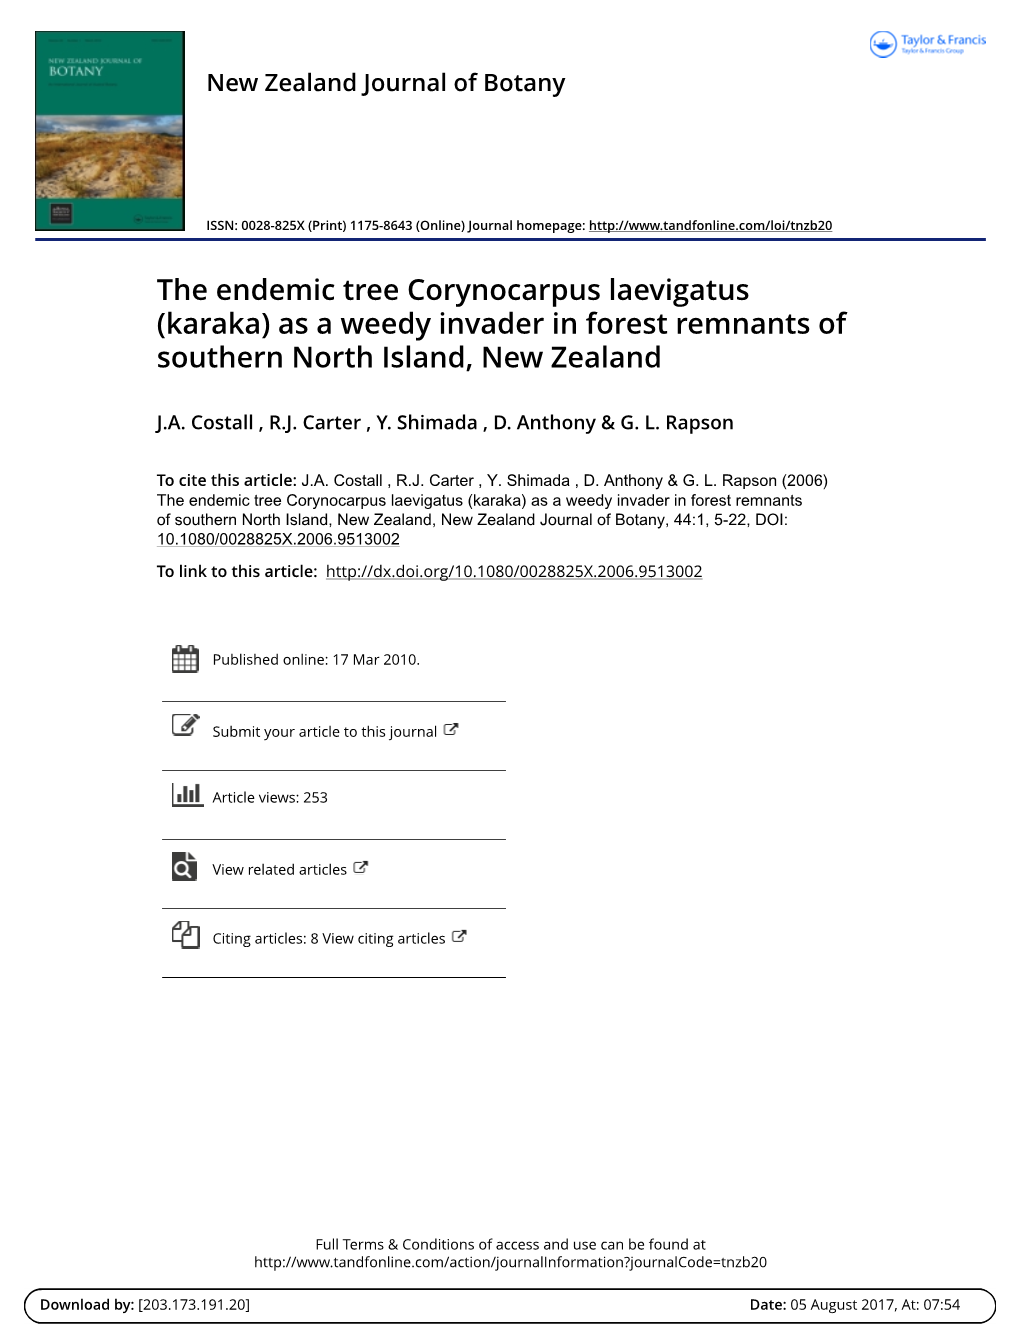 The Endemic Tree Corynocarpus Laevigatus (Karaka) As a Weedy Invader in Forest Remnants of Southern North Island, New Zealand